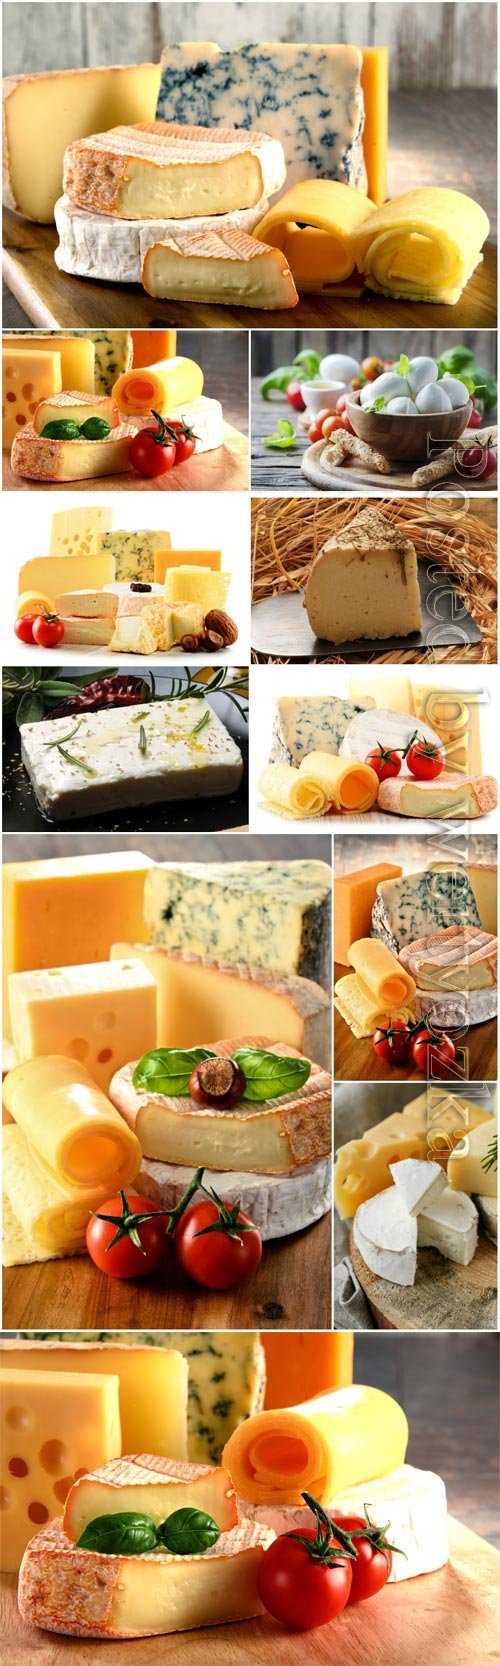 Cheese and tomatoes stock photo